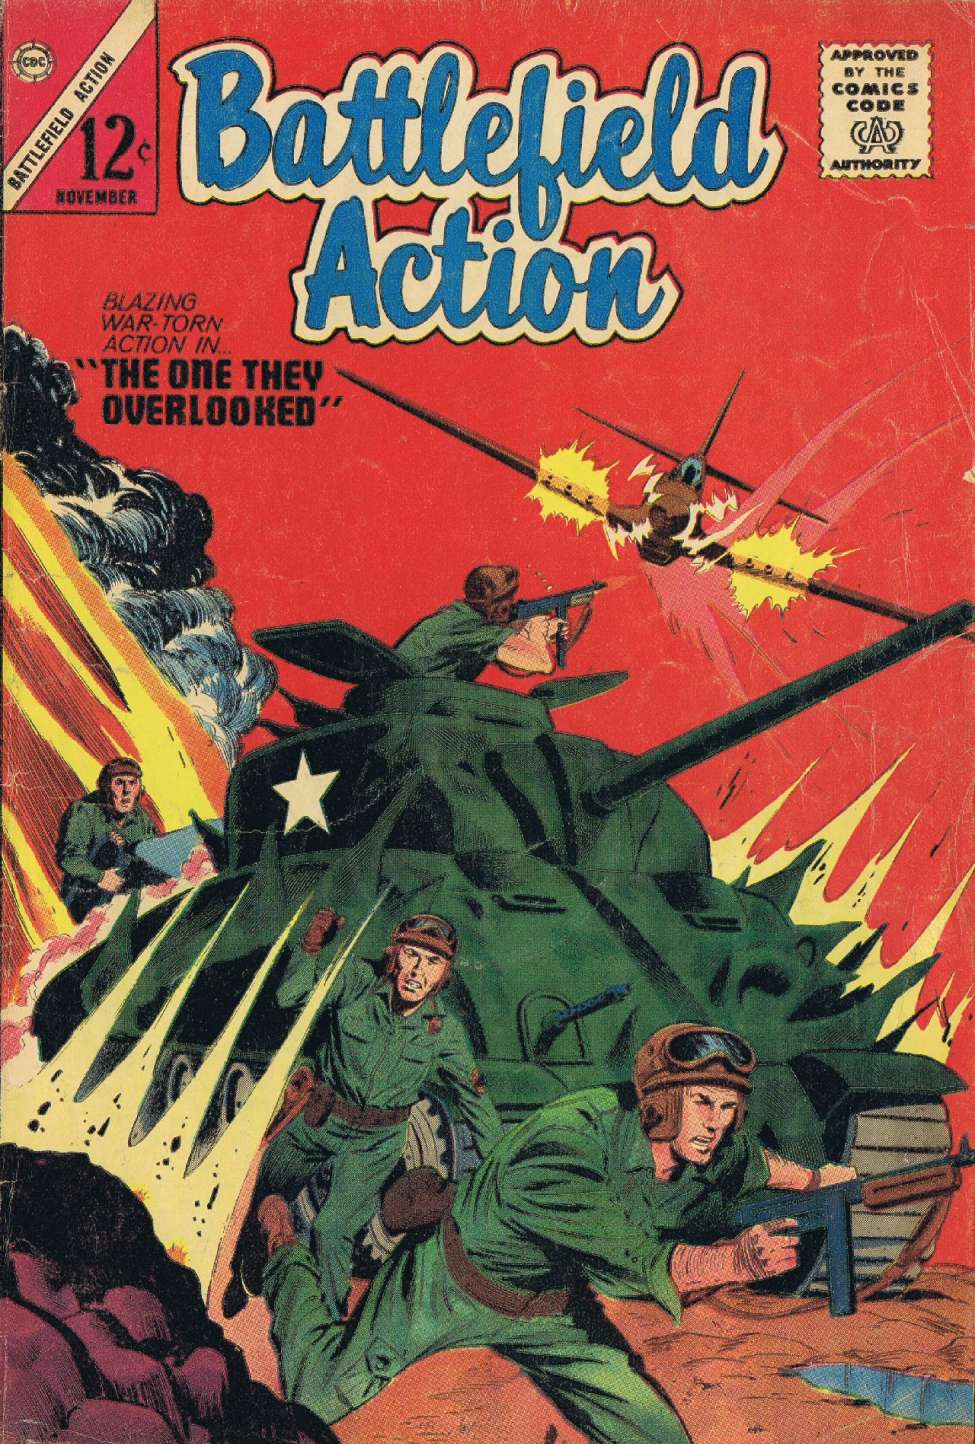 Book Cover For Battlefield Action 50